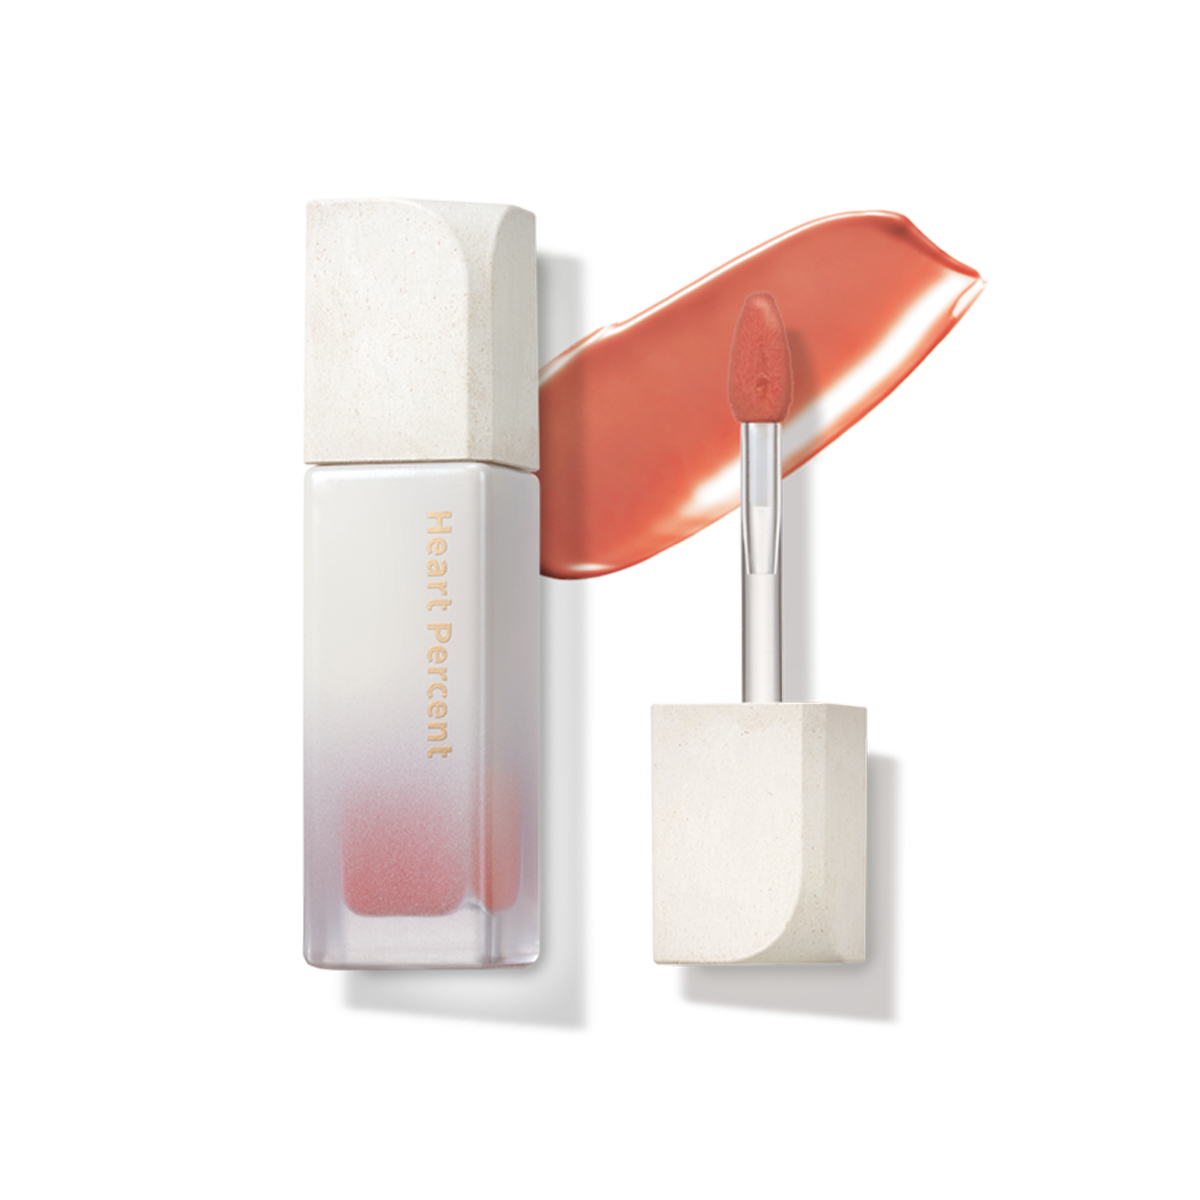 Heart Percent Dote On Mood Pure Glow Tint, 6.8g